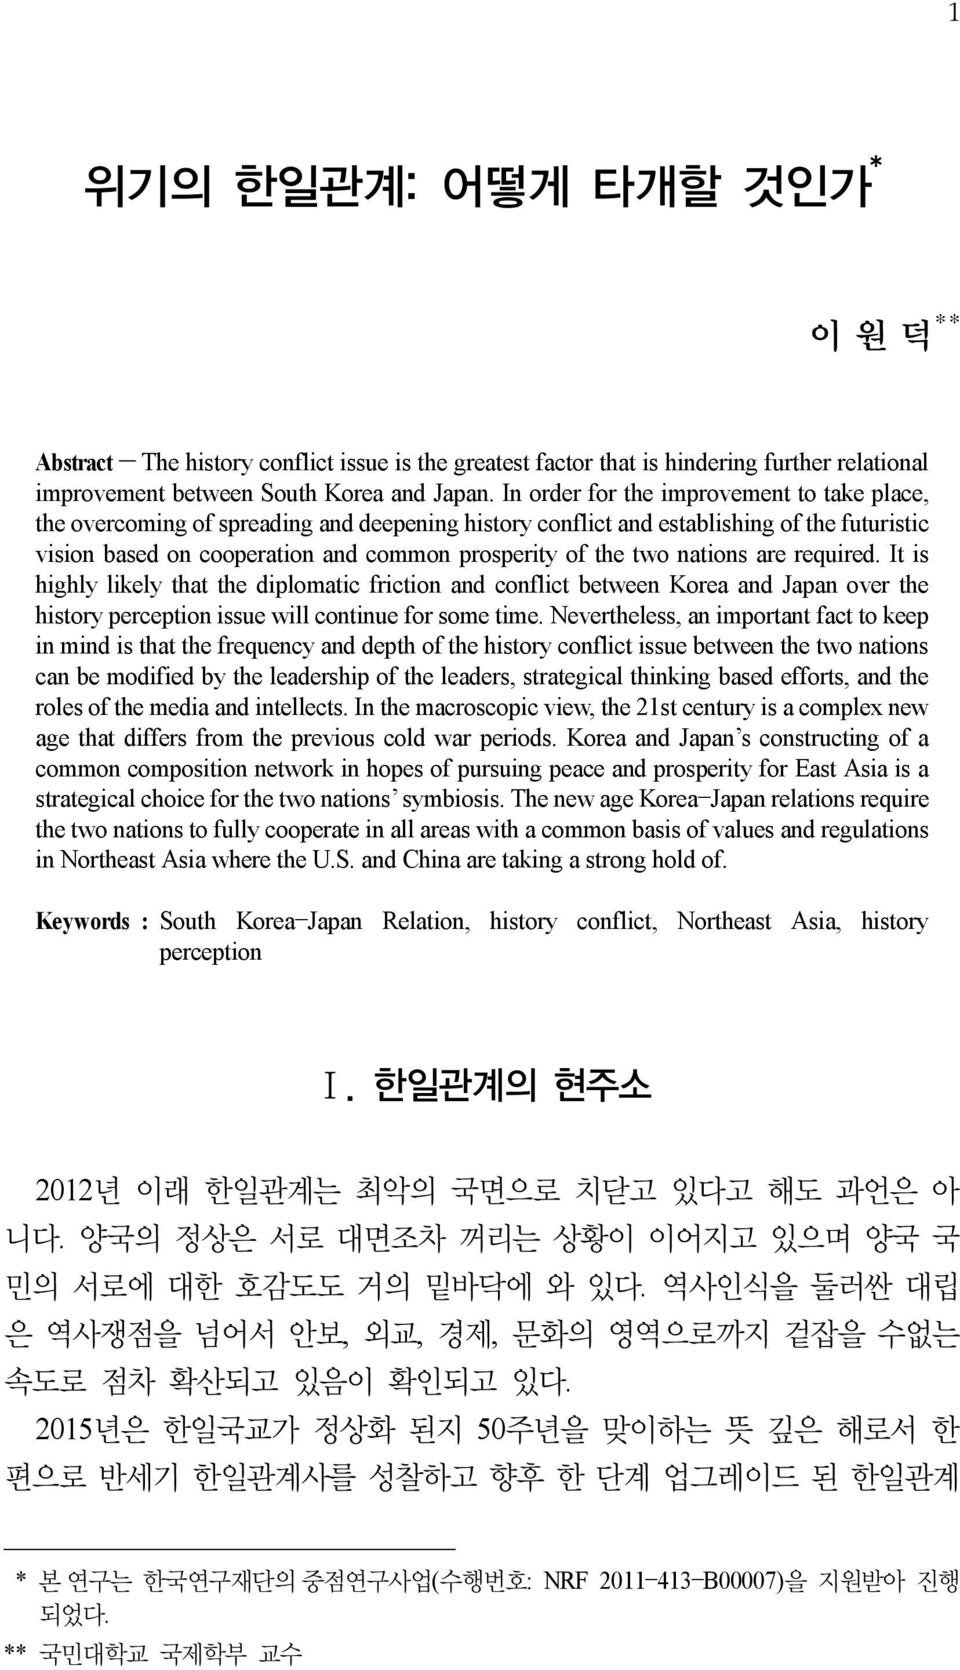 nations are required. It is highly likely that the diplomatic friction and conflict between Korea and Japan over the history perception issue will continue for some time.